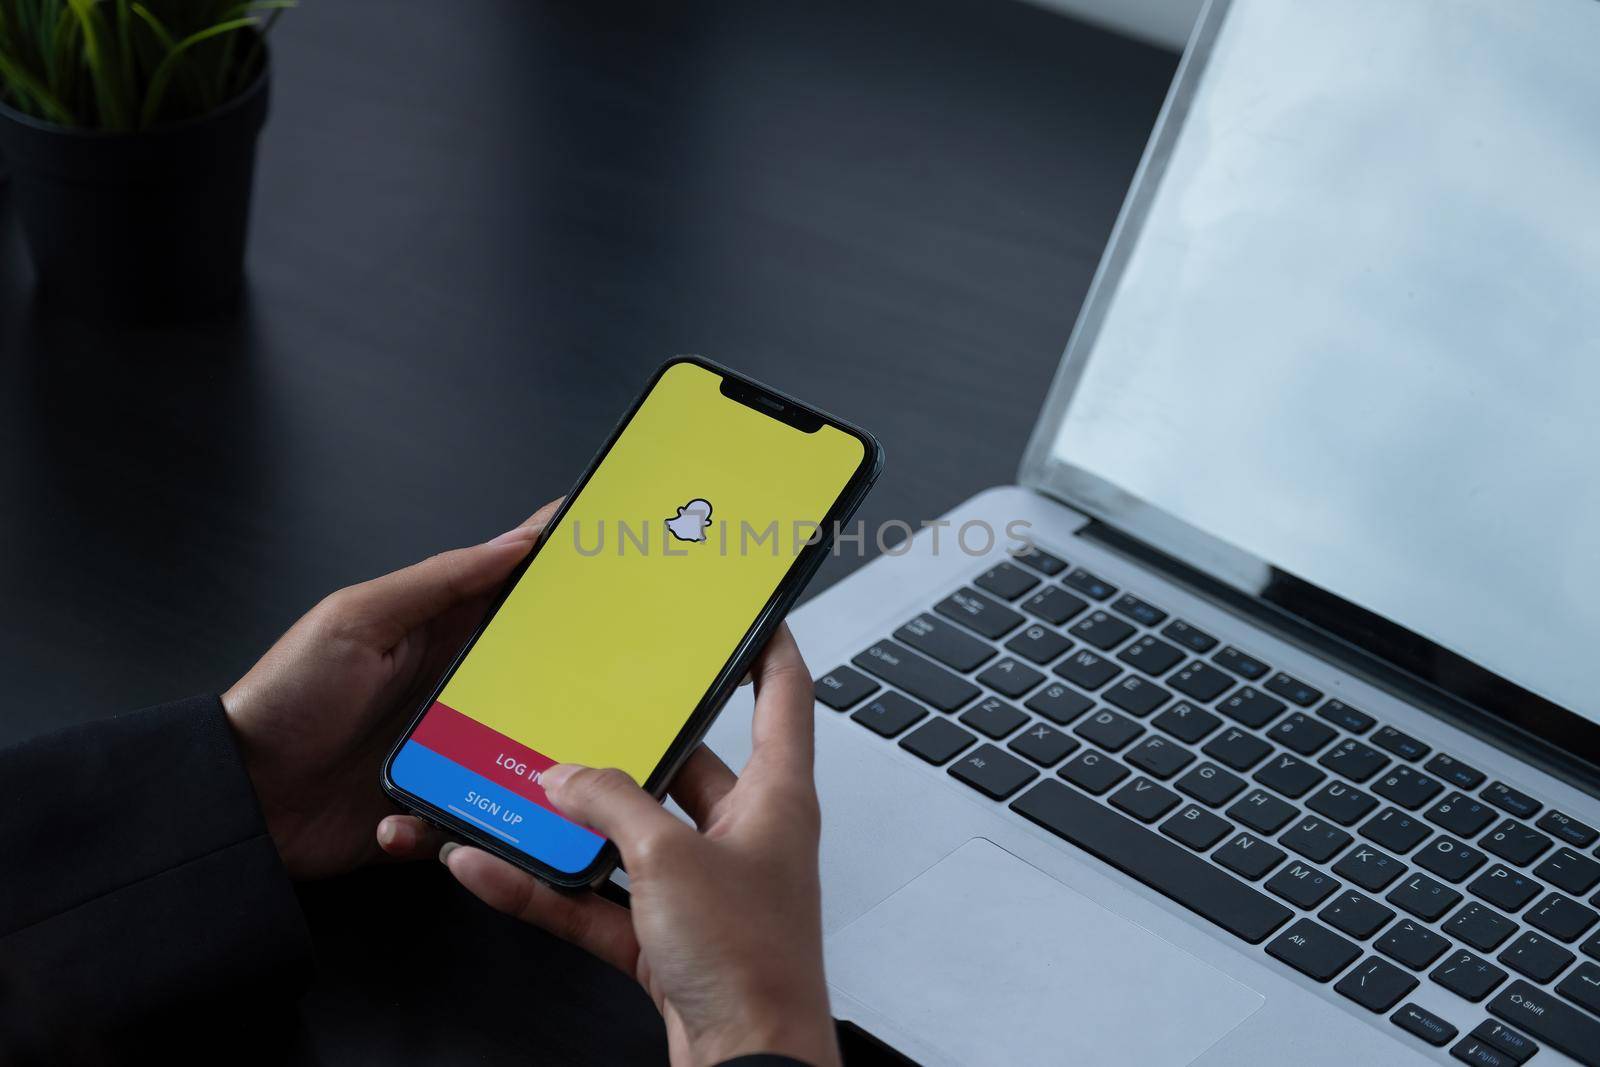 CHIANG MAI, THAILAND, APR 6, 2021 : Snapchat application icon on Apple iPhone X smartphone screen close-up in woman hands. Snapchat app icon. Social media icon. Social network